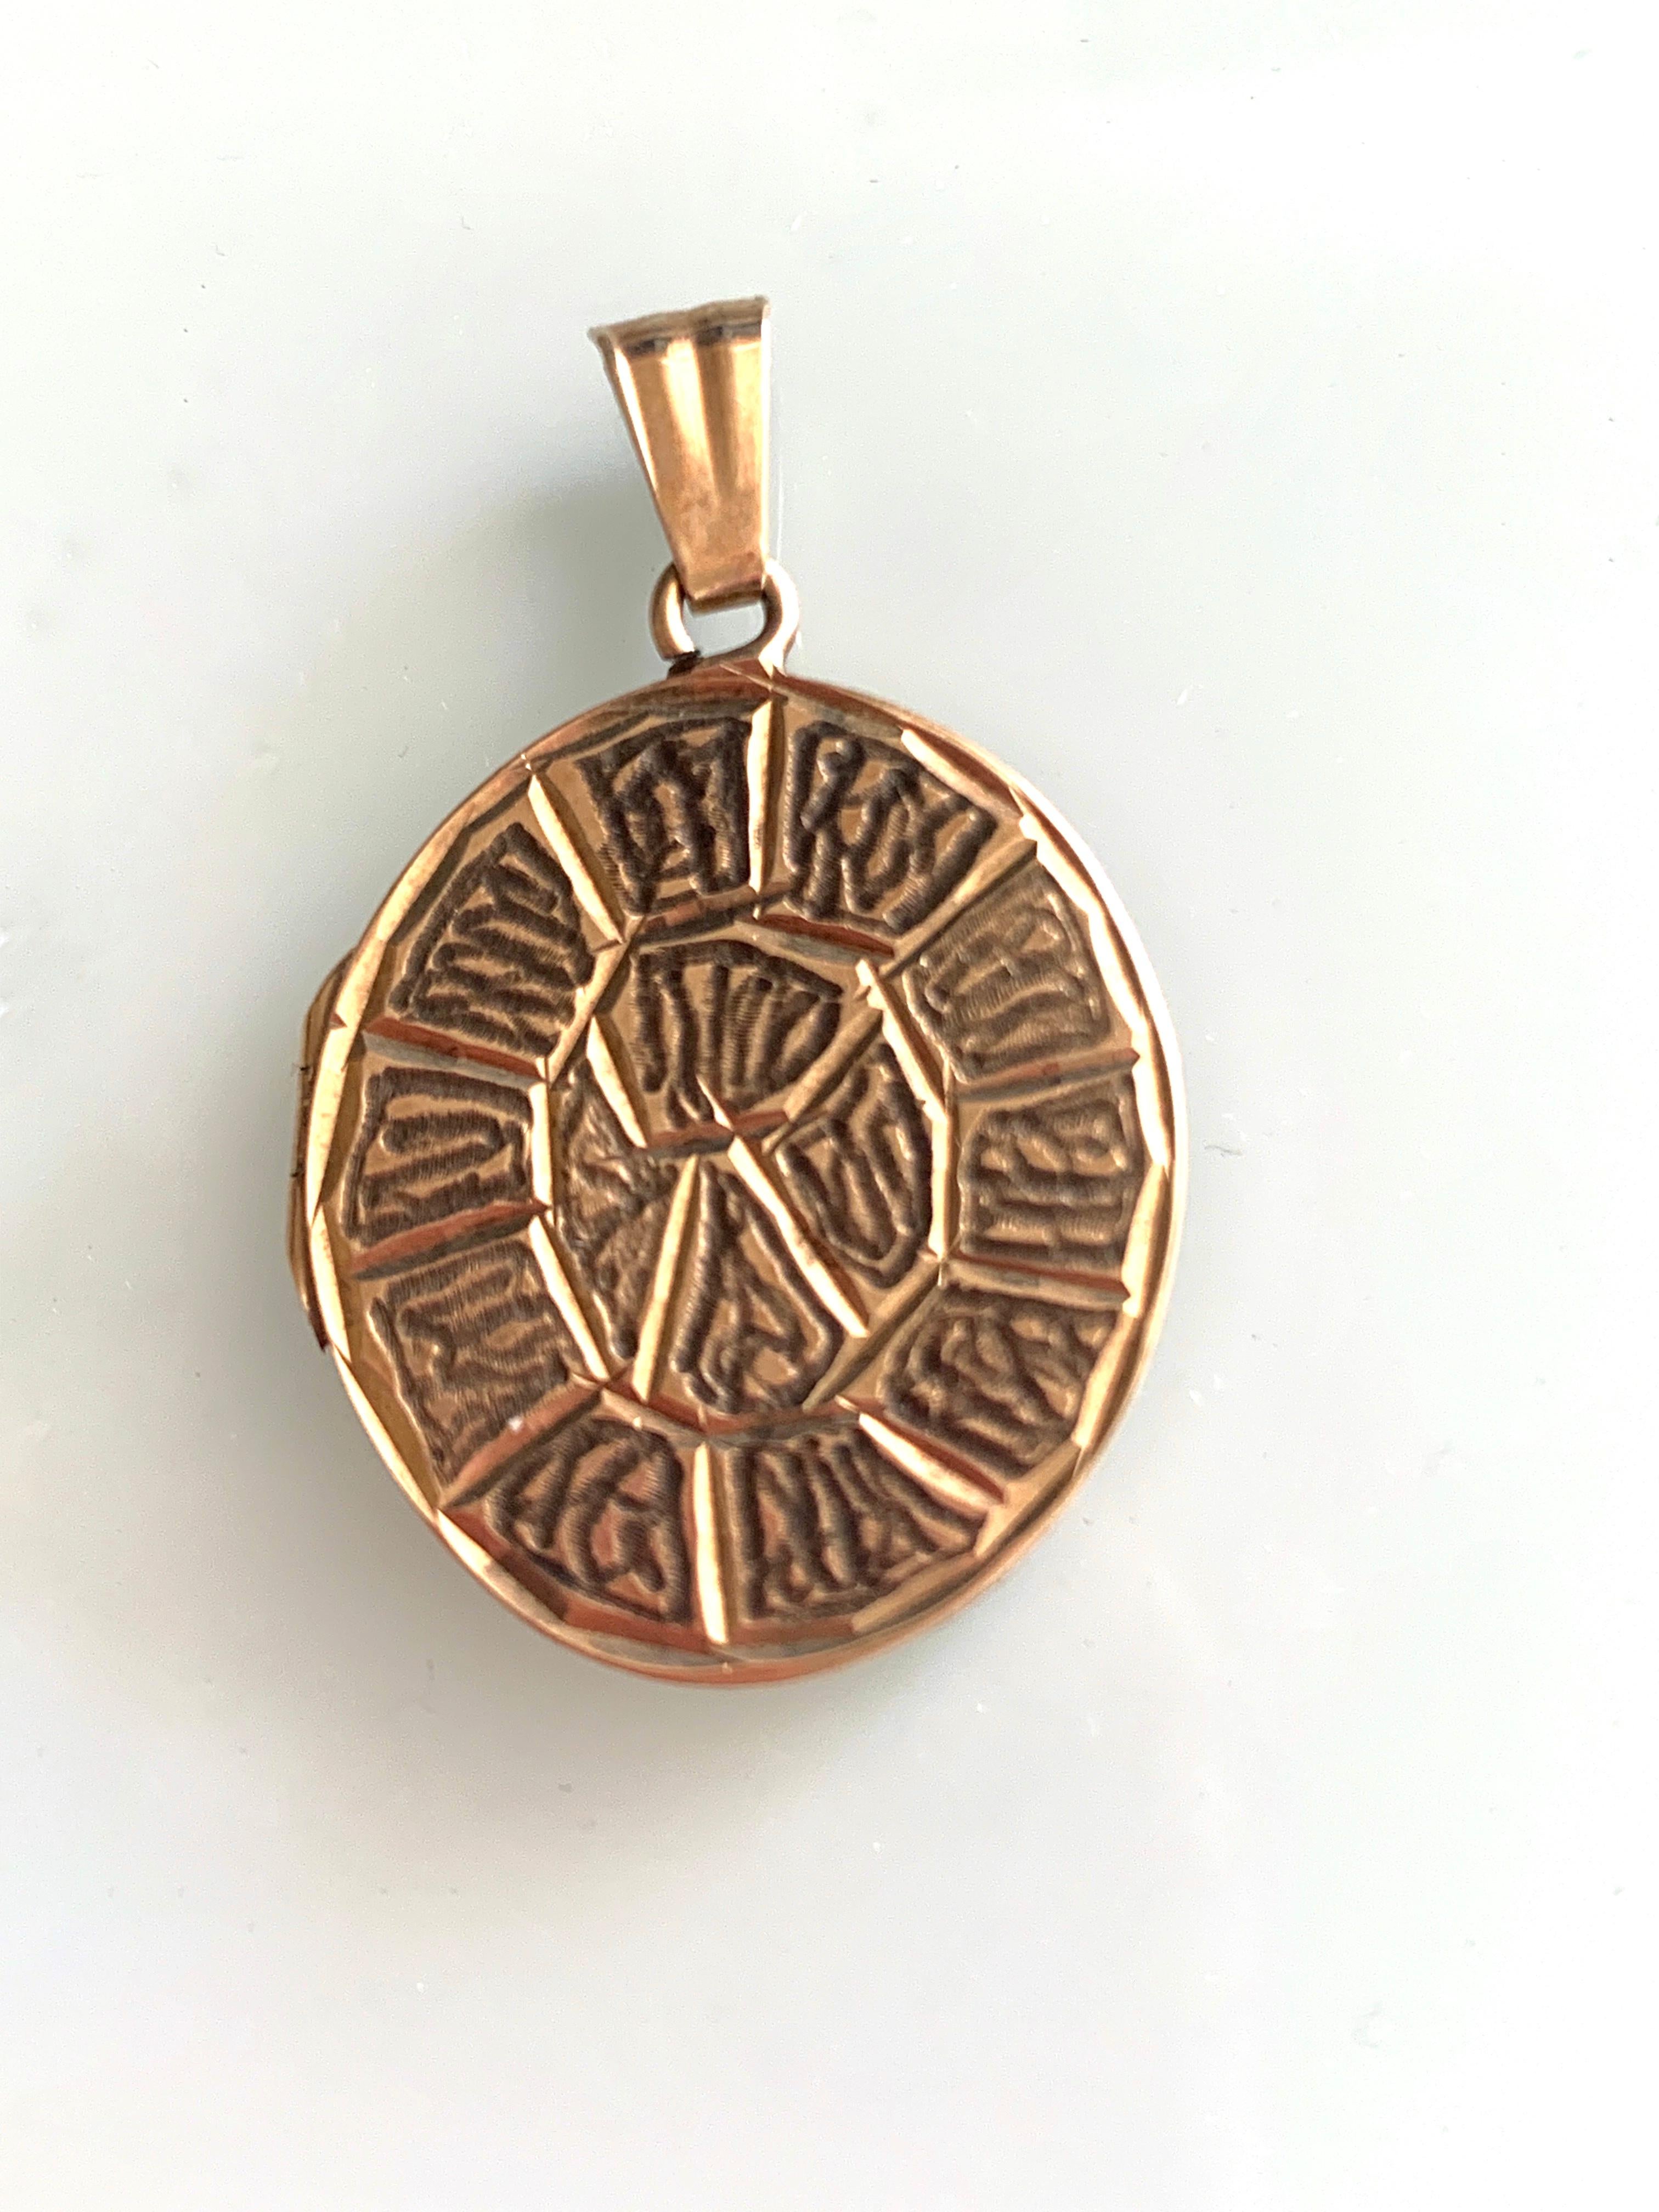 An Unusual Brutalist engraving on the front of this locket
evokes the Hippy 1970s feel 
Produced in England U.K- 1976
and fully hallmarked on reverse 
opens and snaps shuts neatly 
has a soldered bail 
measures height 2.5cm (without the bail)
Bail